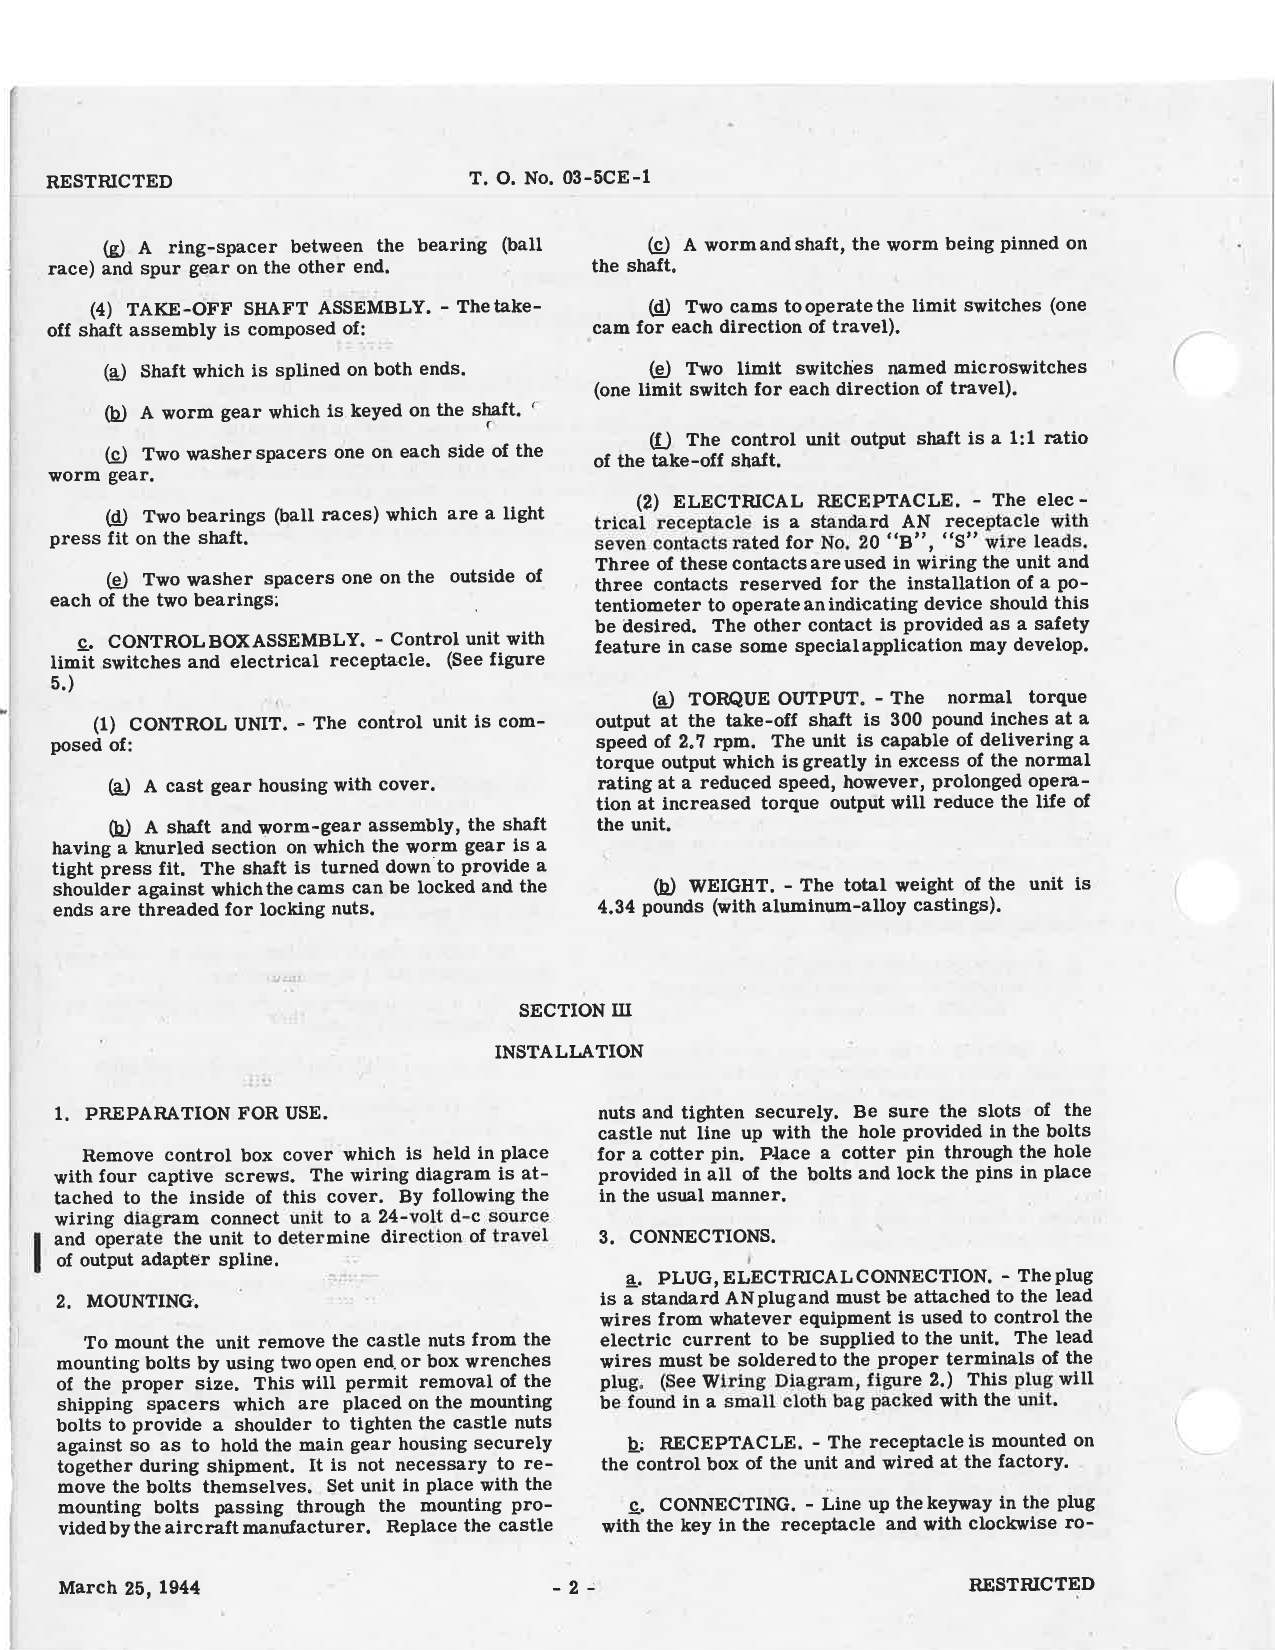 Sample page 6 from AirCorps Library document: Handbook of Instructions with Parts Catalog for Types CM-B111-A and B Control Drives